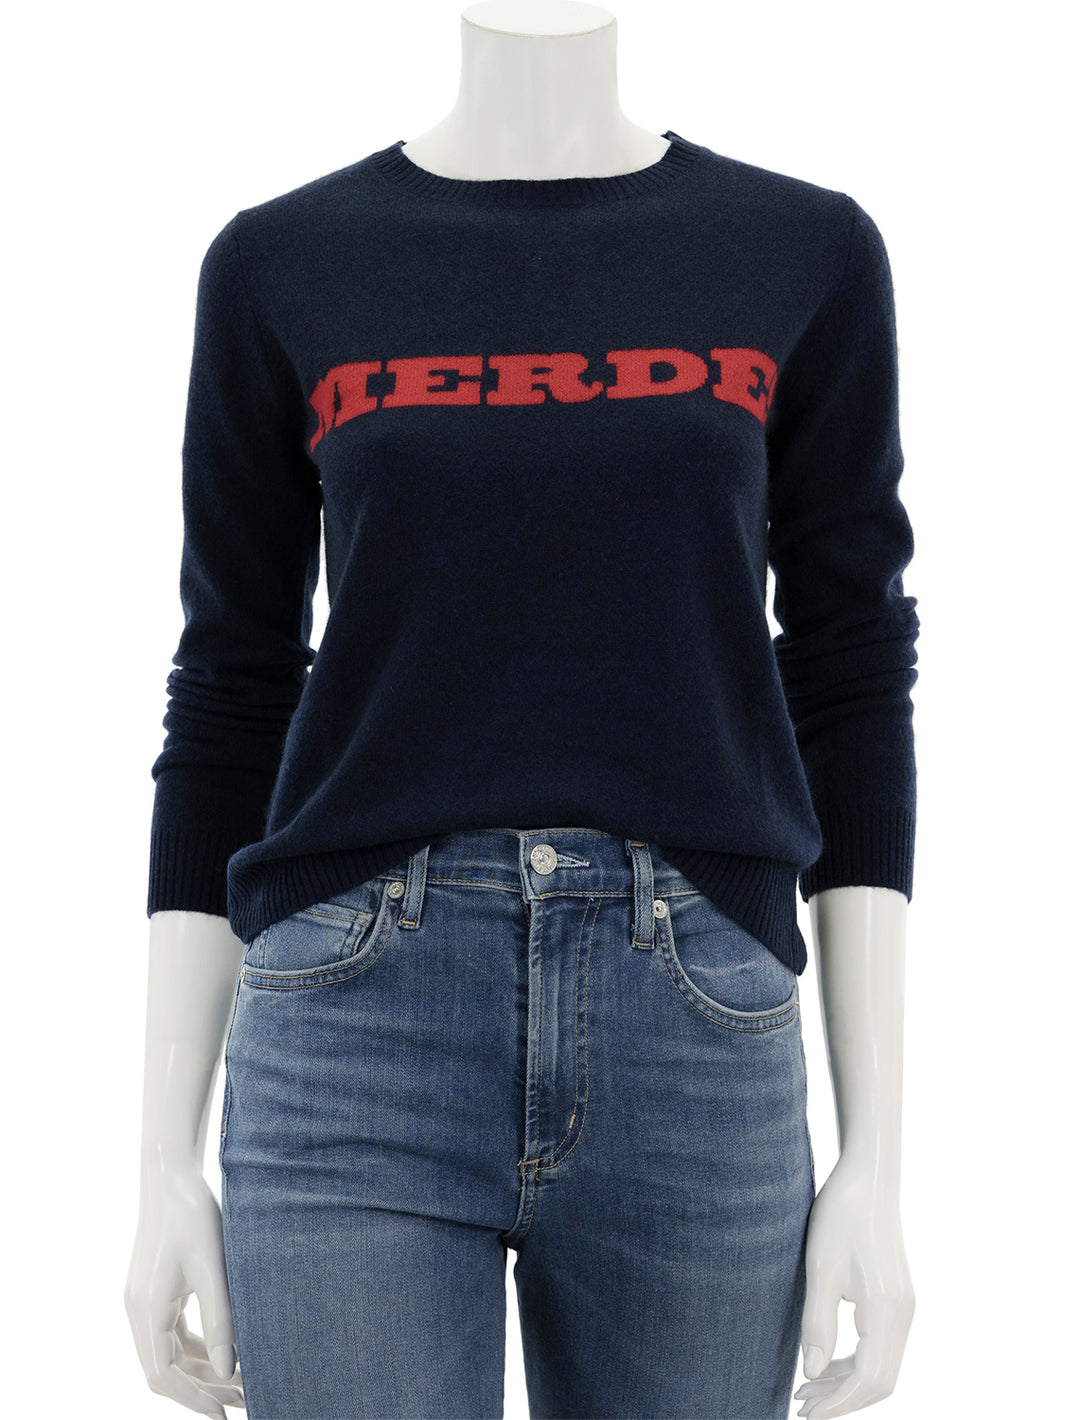 Front view of Jumper 1234's merde sweater in navy and red.